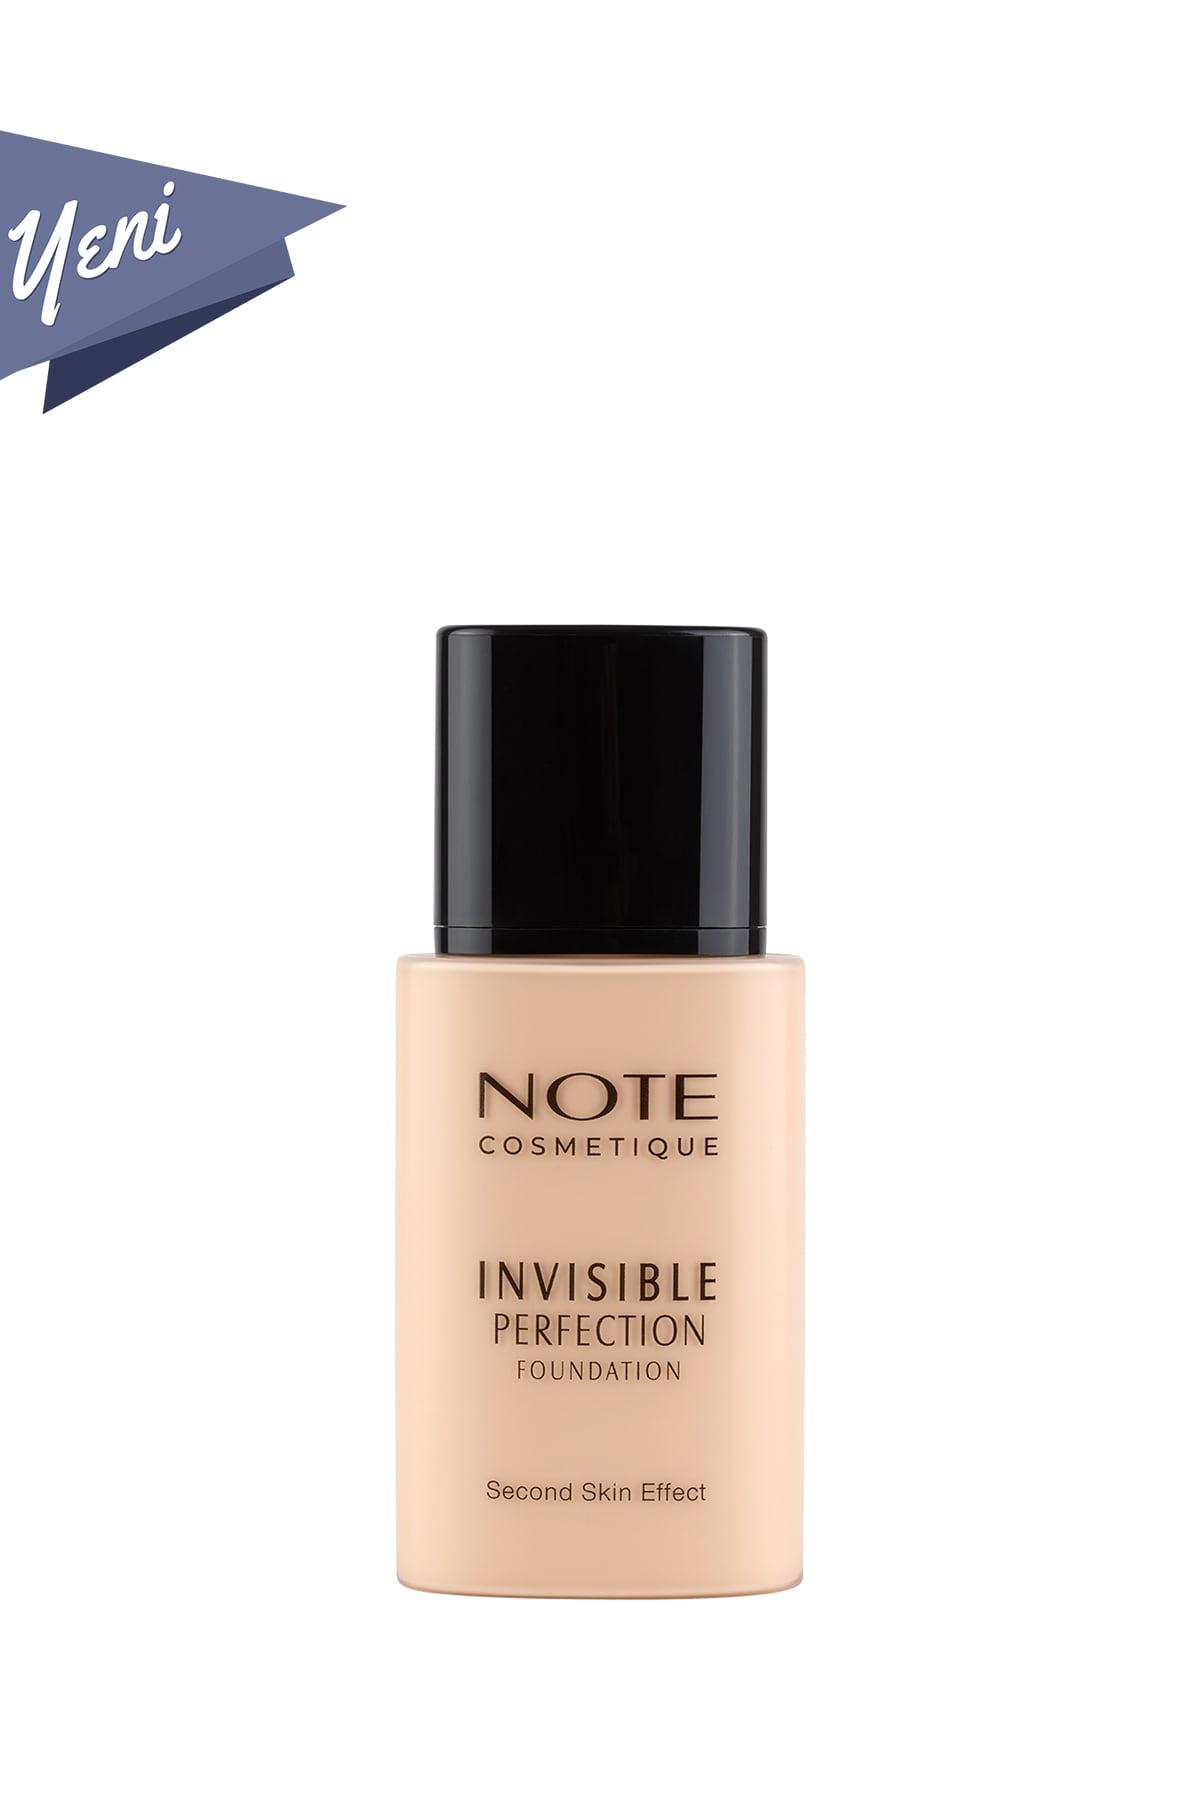 Note Invisible Perfection 120 Natural Ivory Evet Likit Tüp Fondöten 35 ml